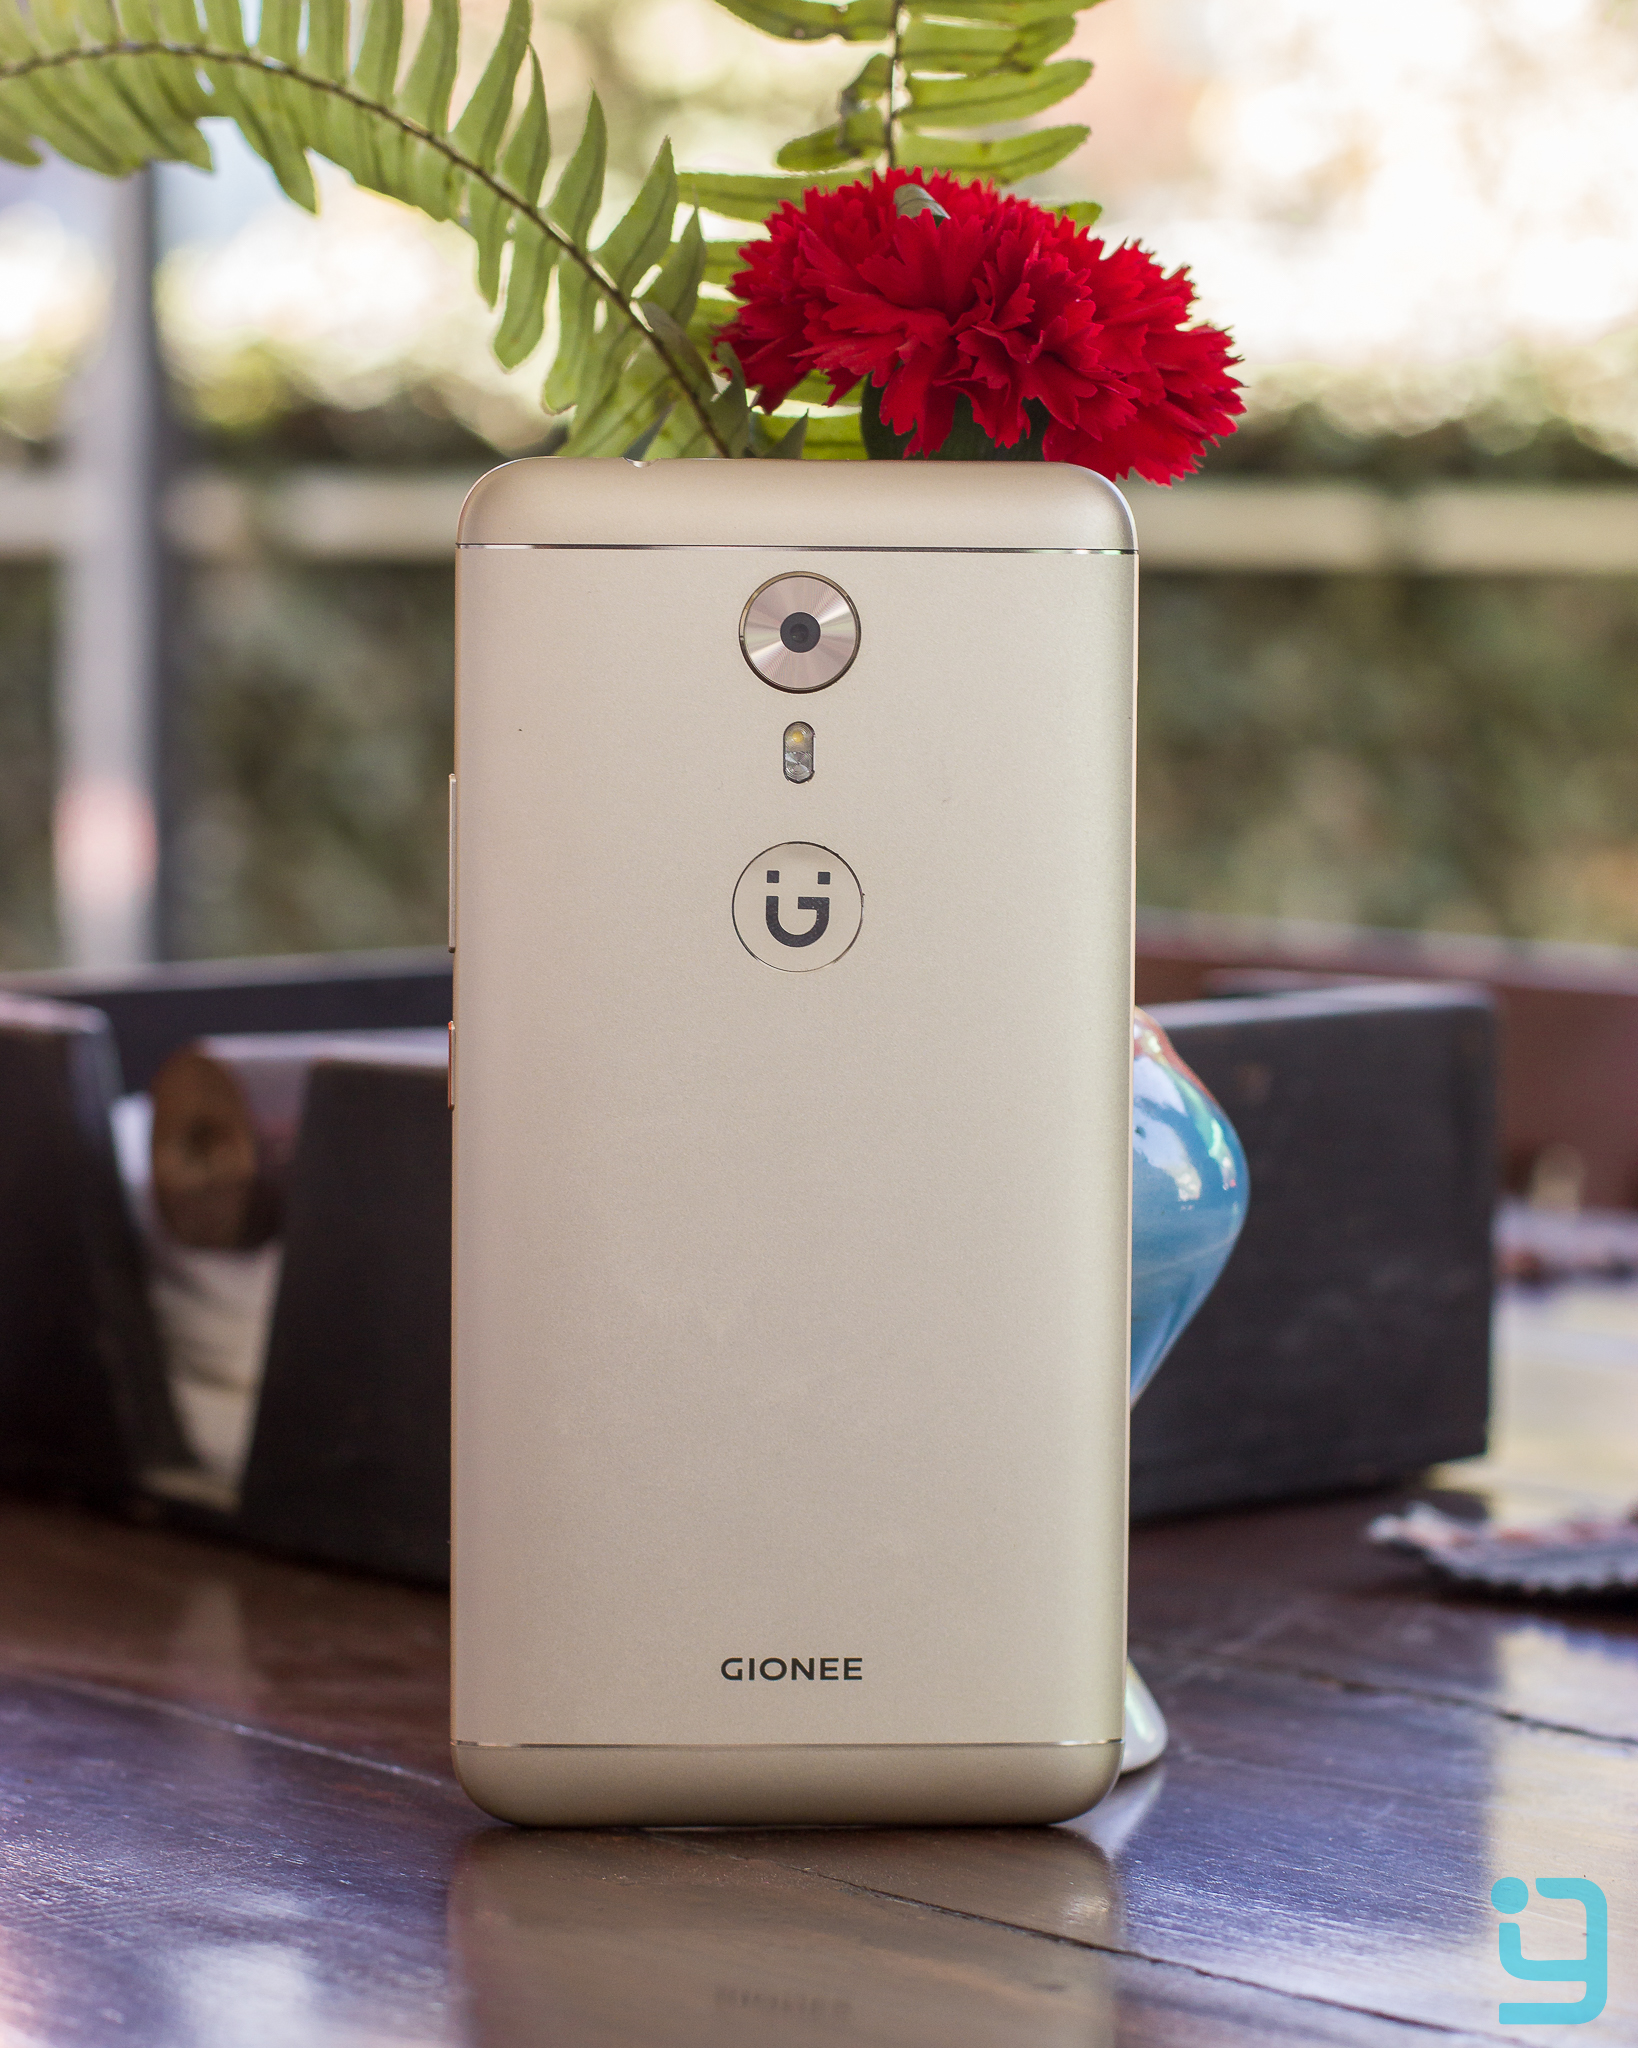 Gionee A1 back View with Gionee Branding